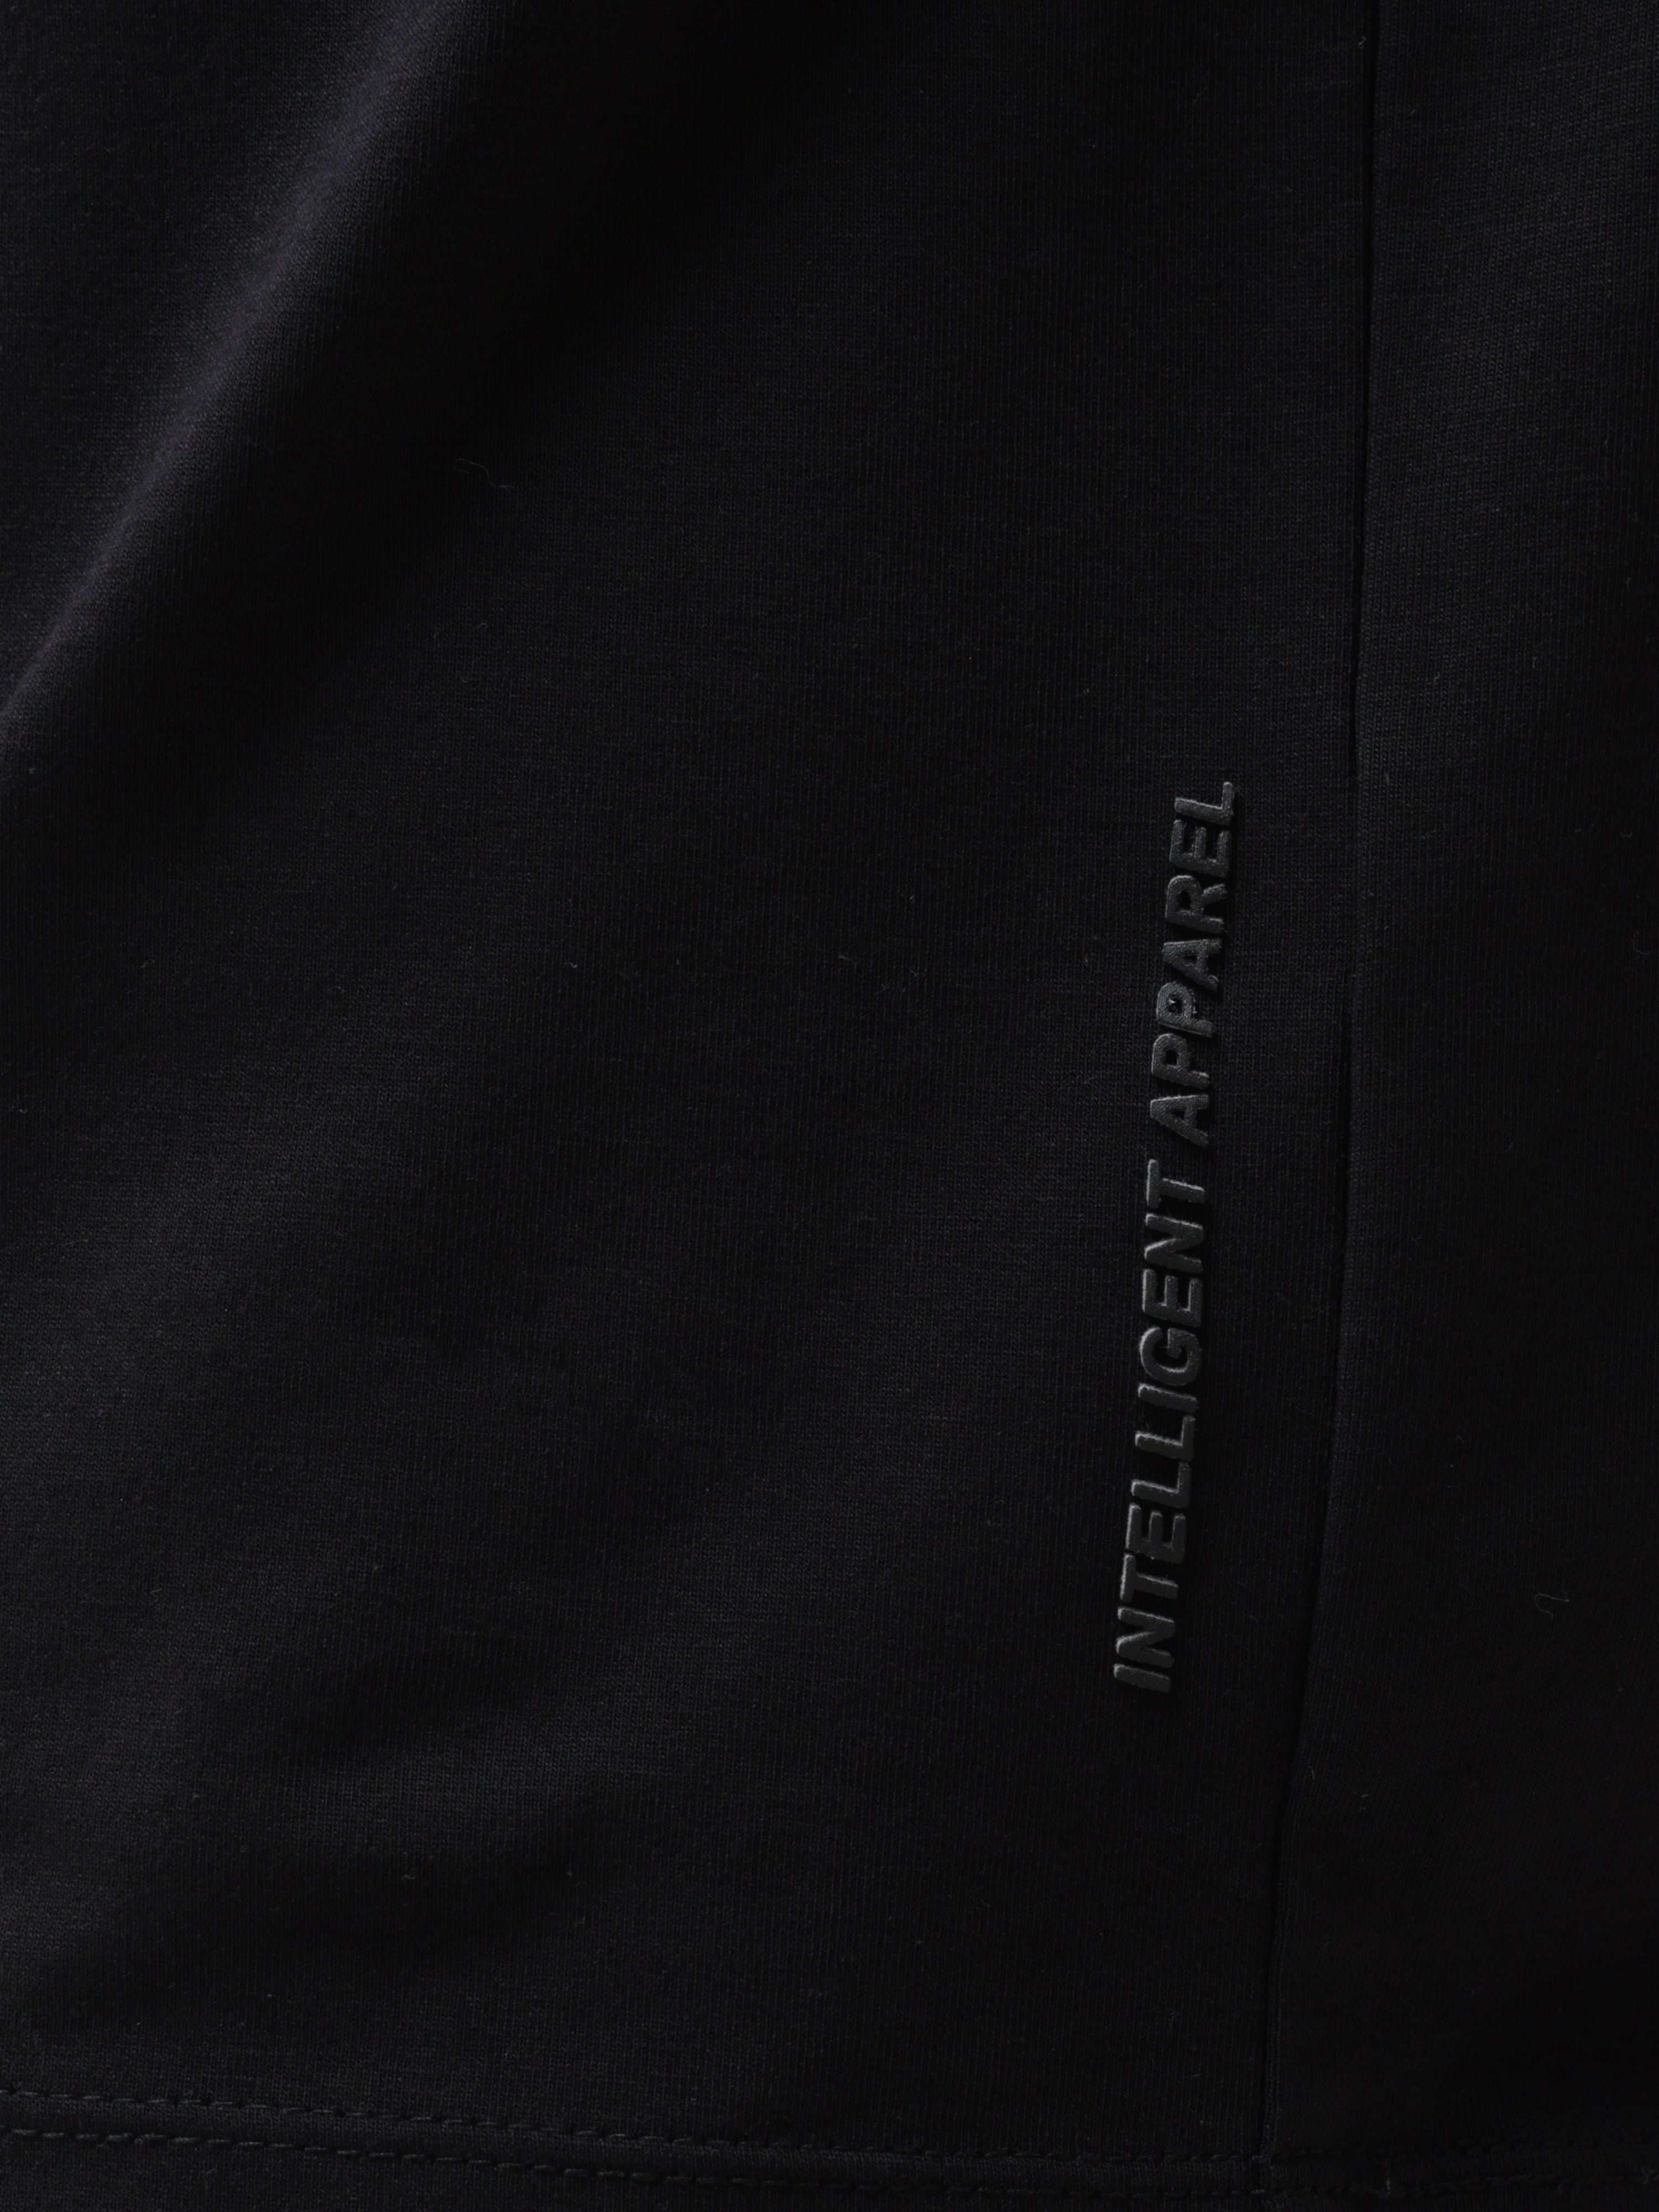 Close-up of Midnight Elegance Turms T-shirt showcasing "Intelligent Apparel" text on black fabric, emphasizing anti-stain and anti-odor properties.